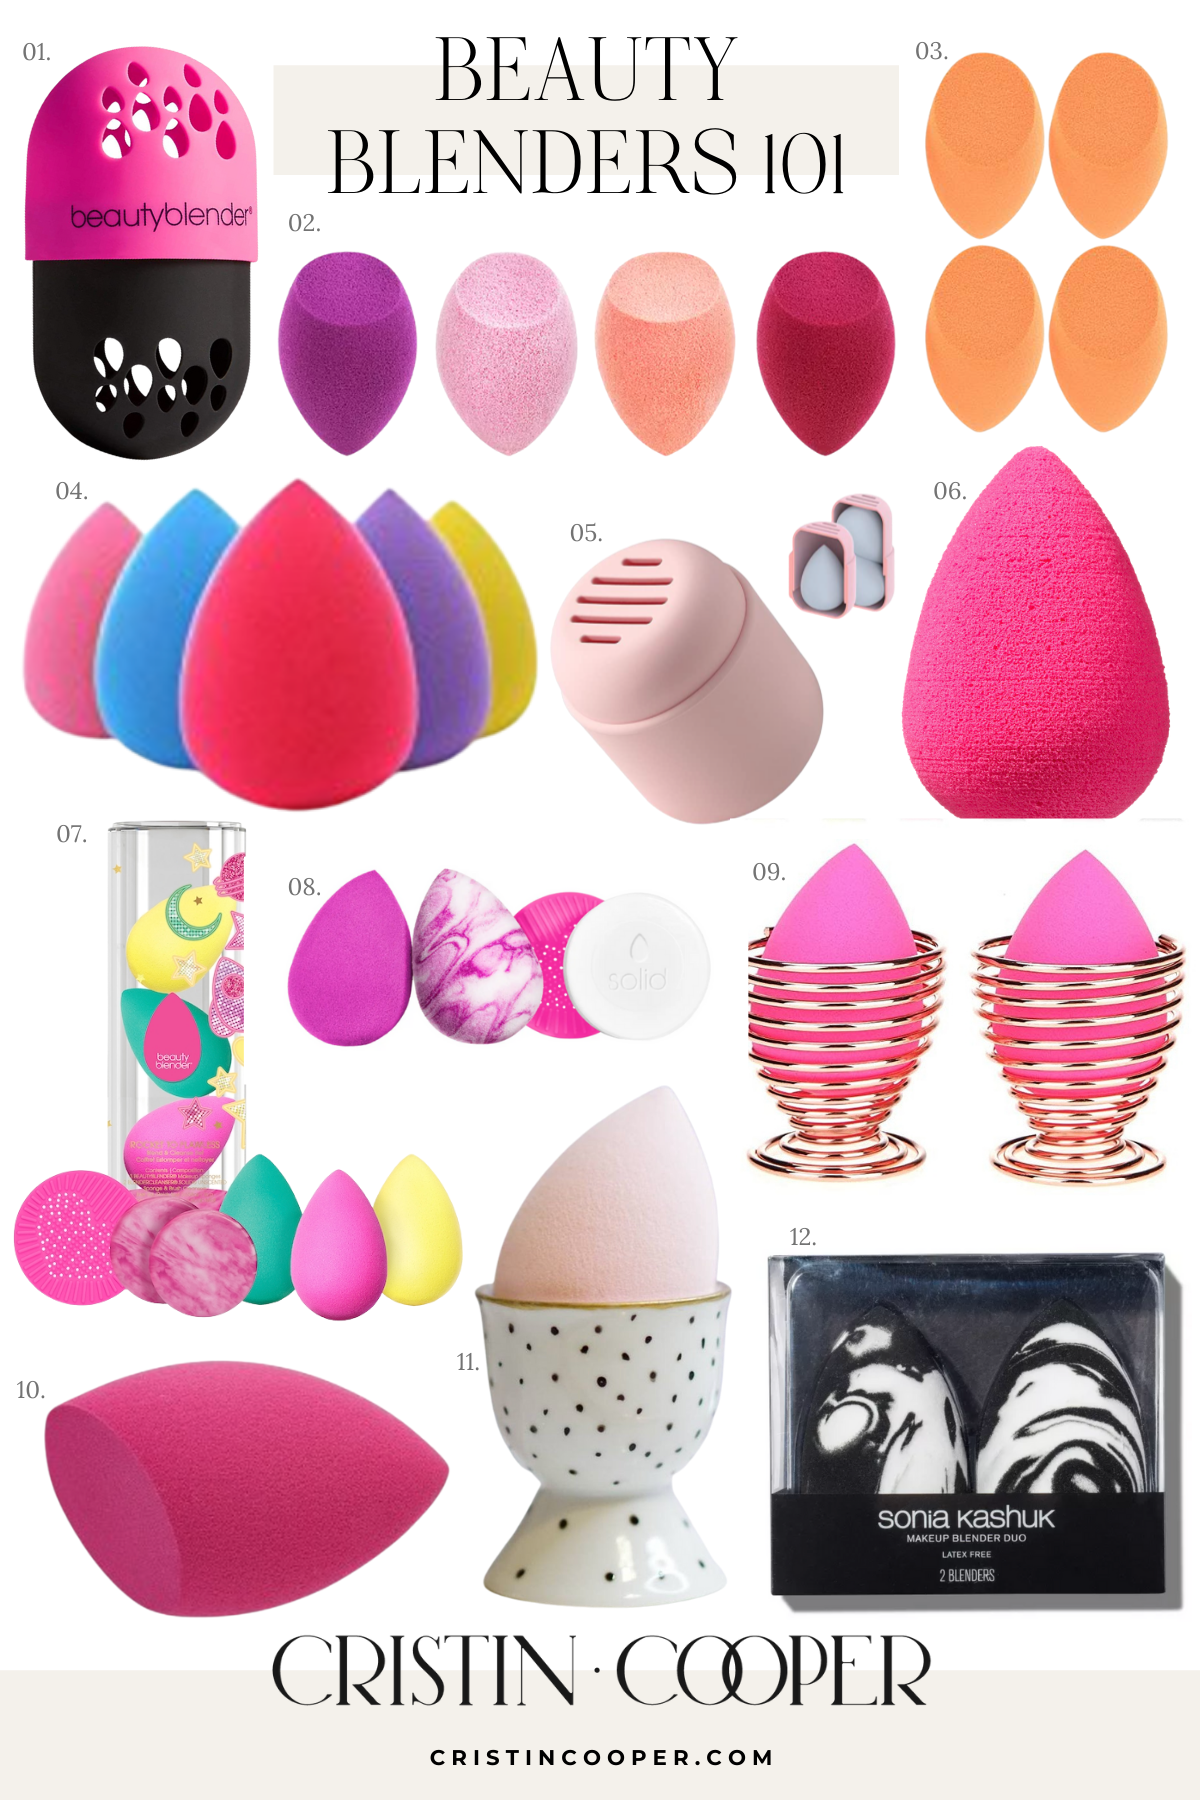 The original Beauty Blender and dupes. 